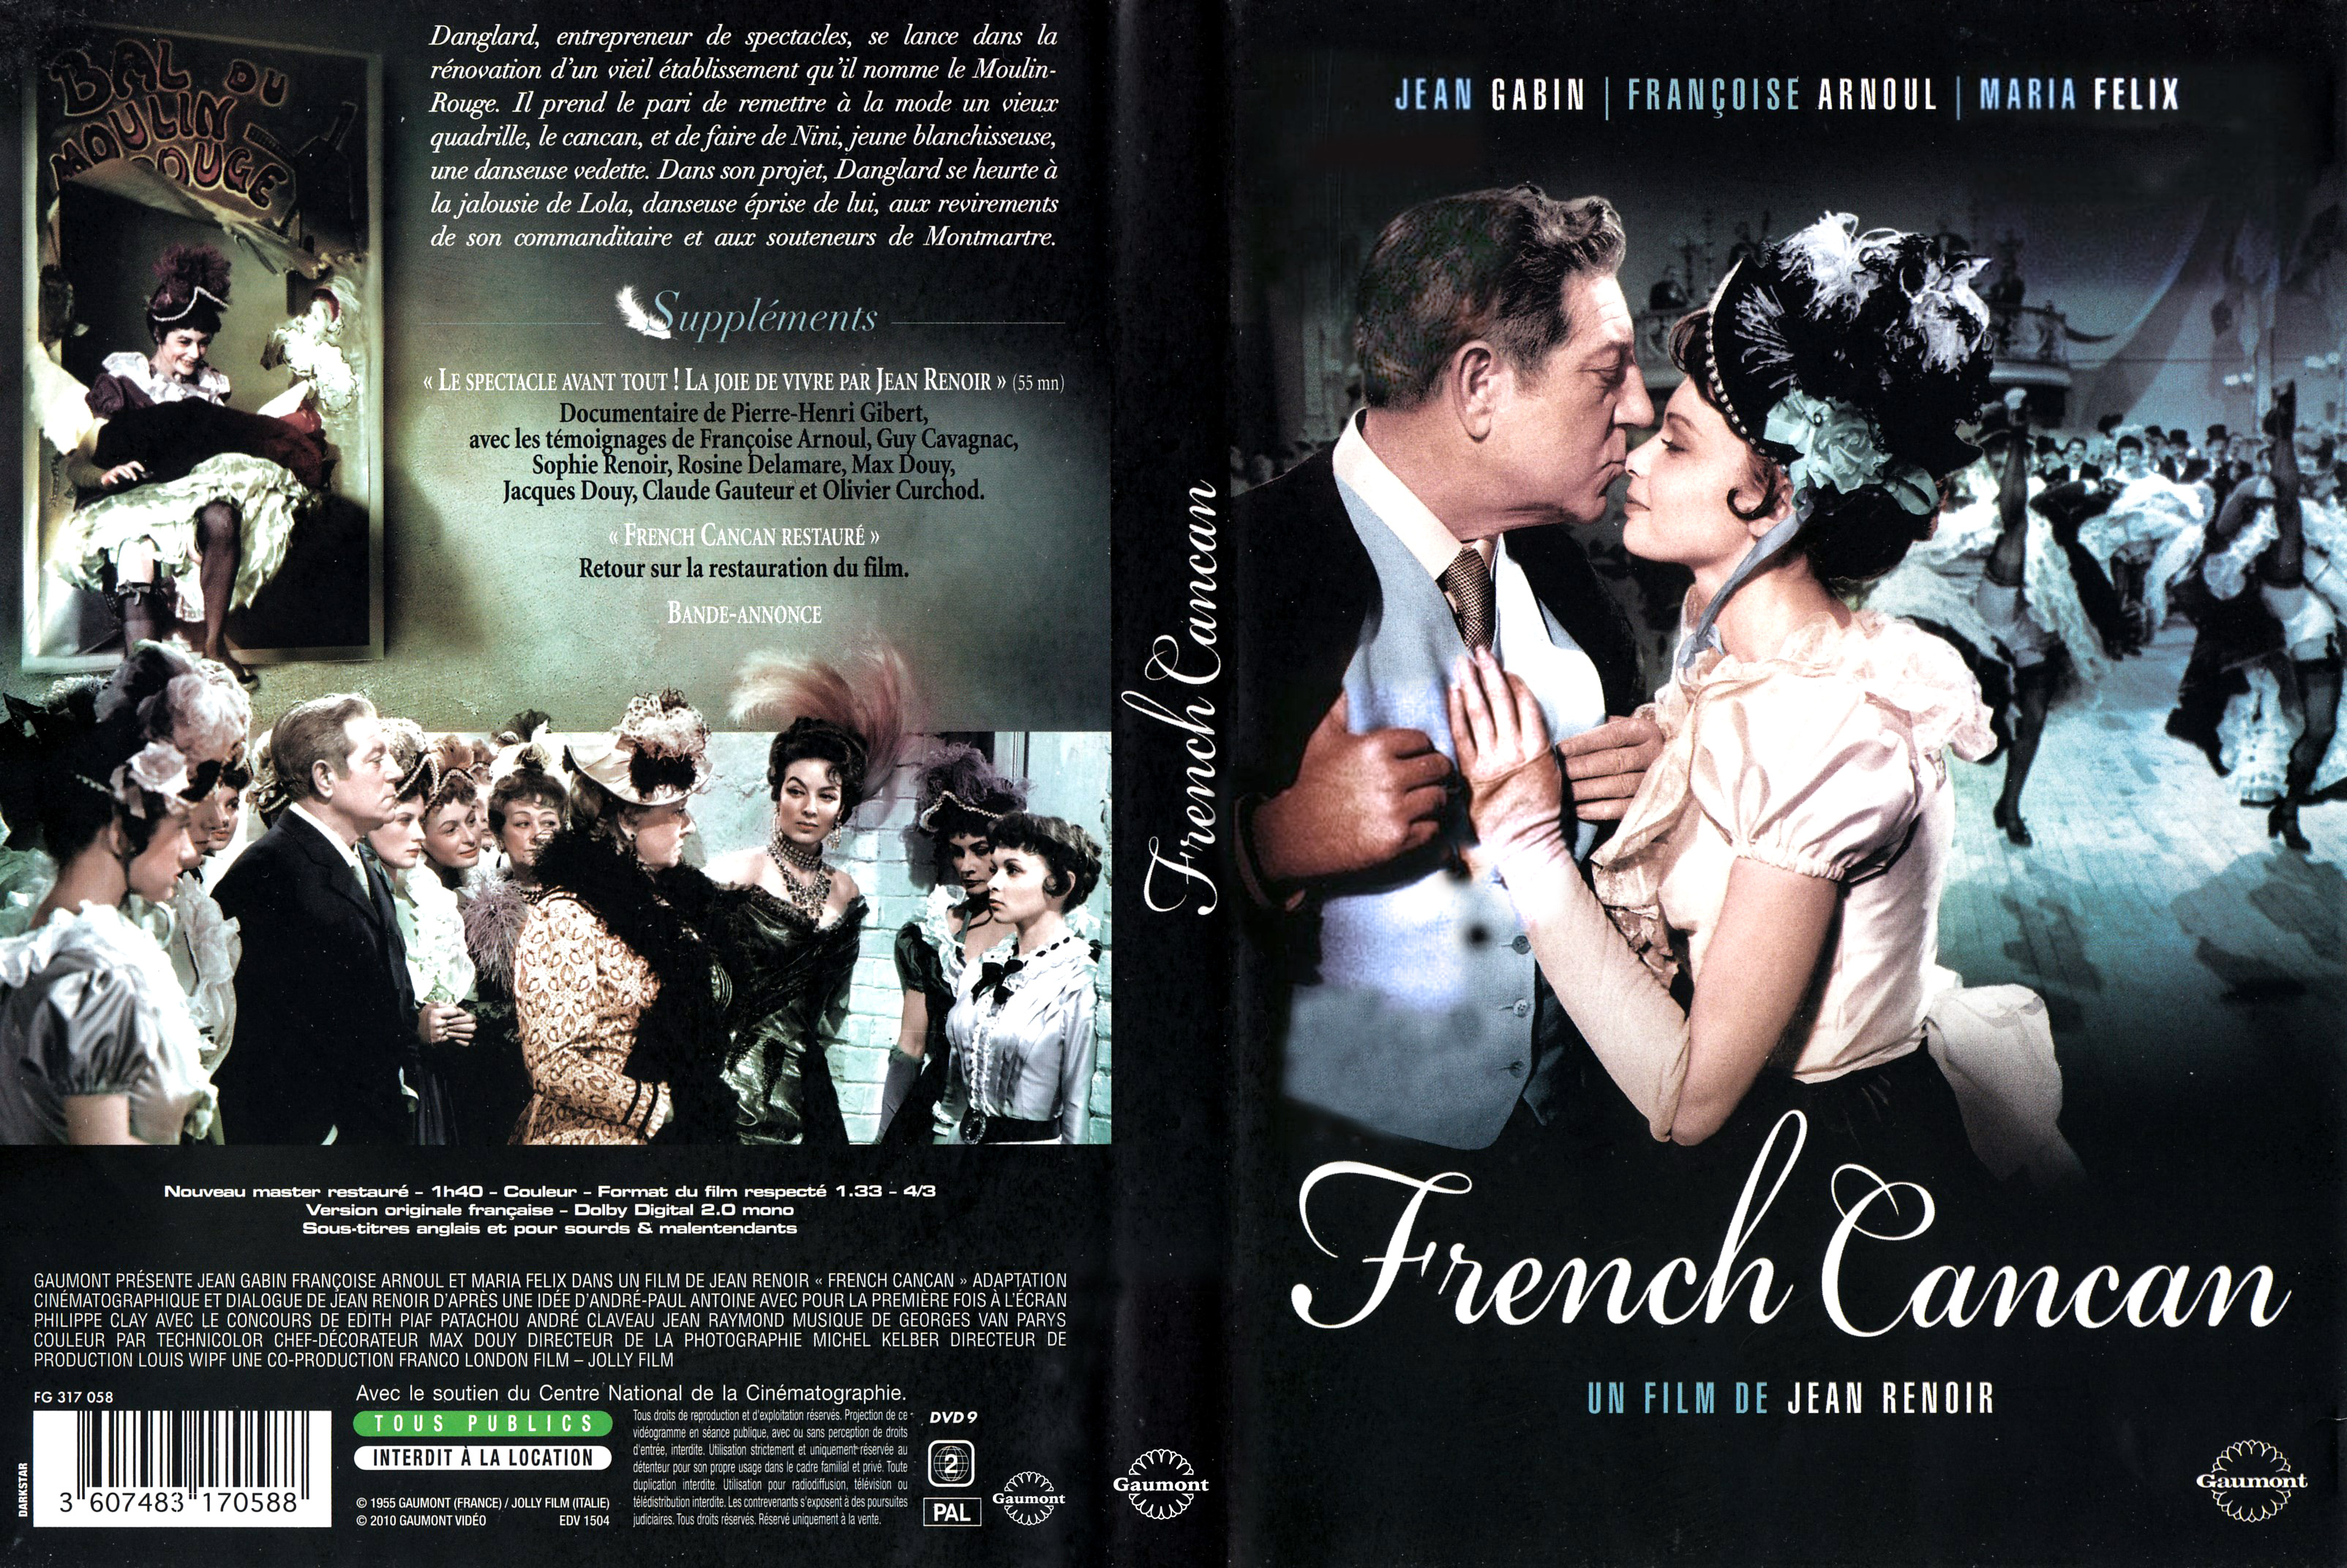 Jaquette DVD French Cancan v3